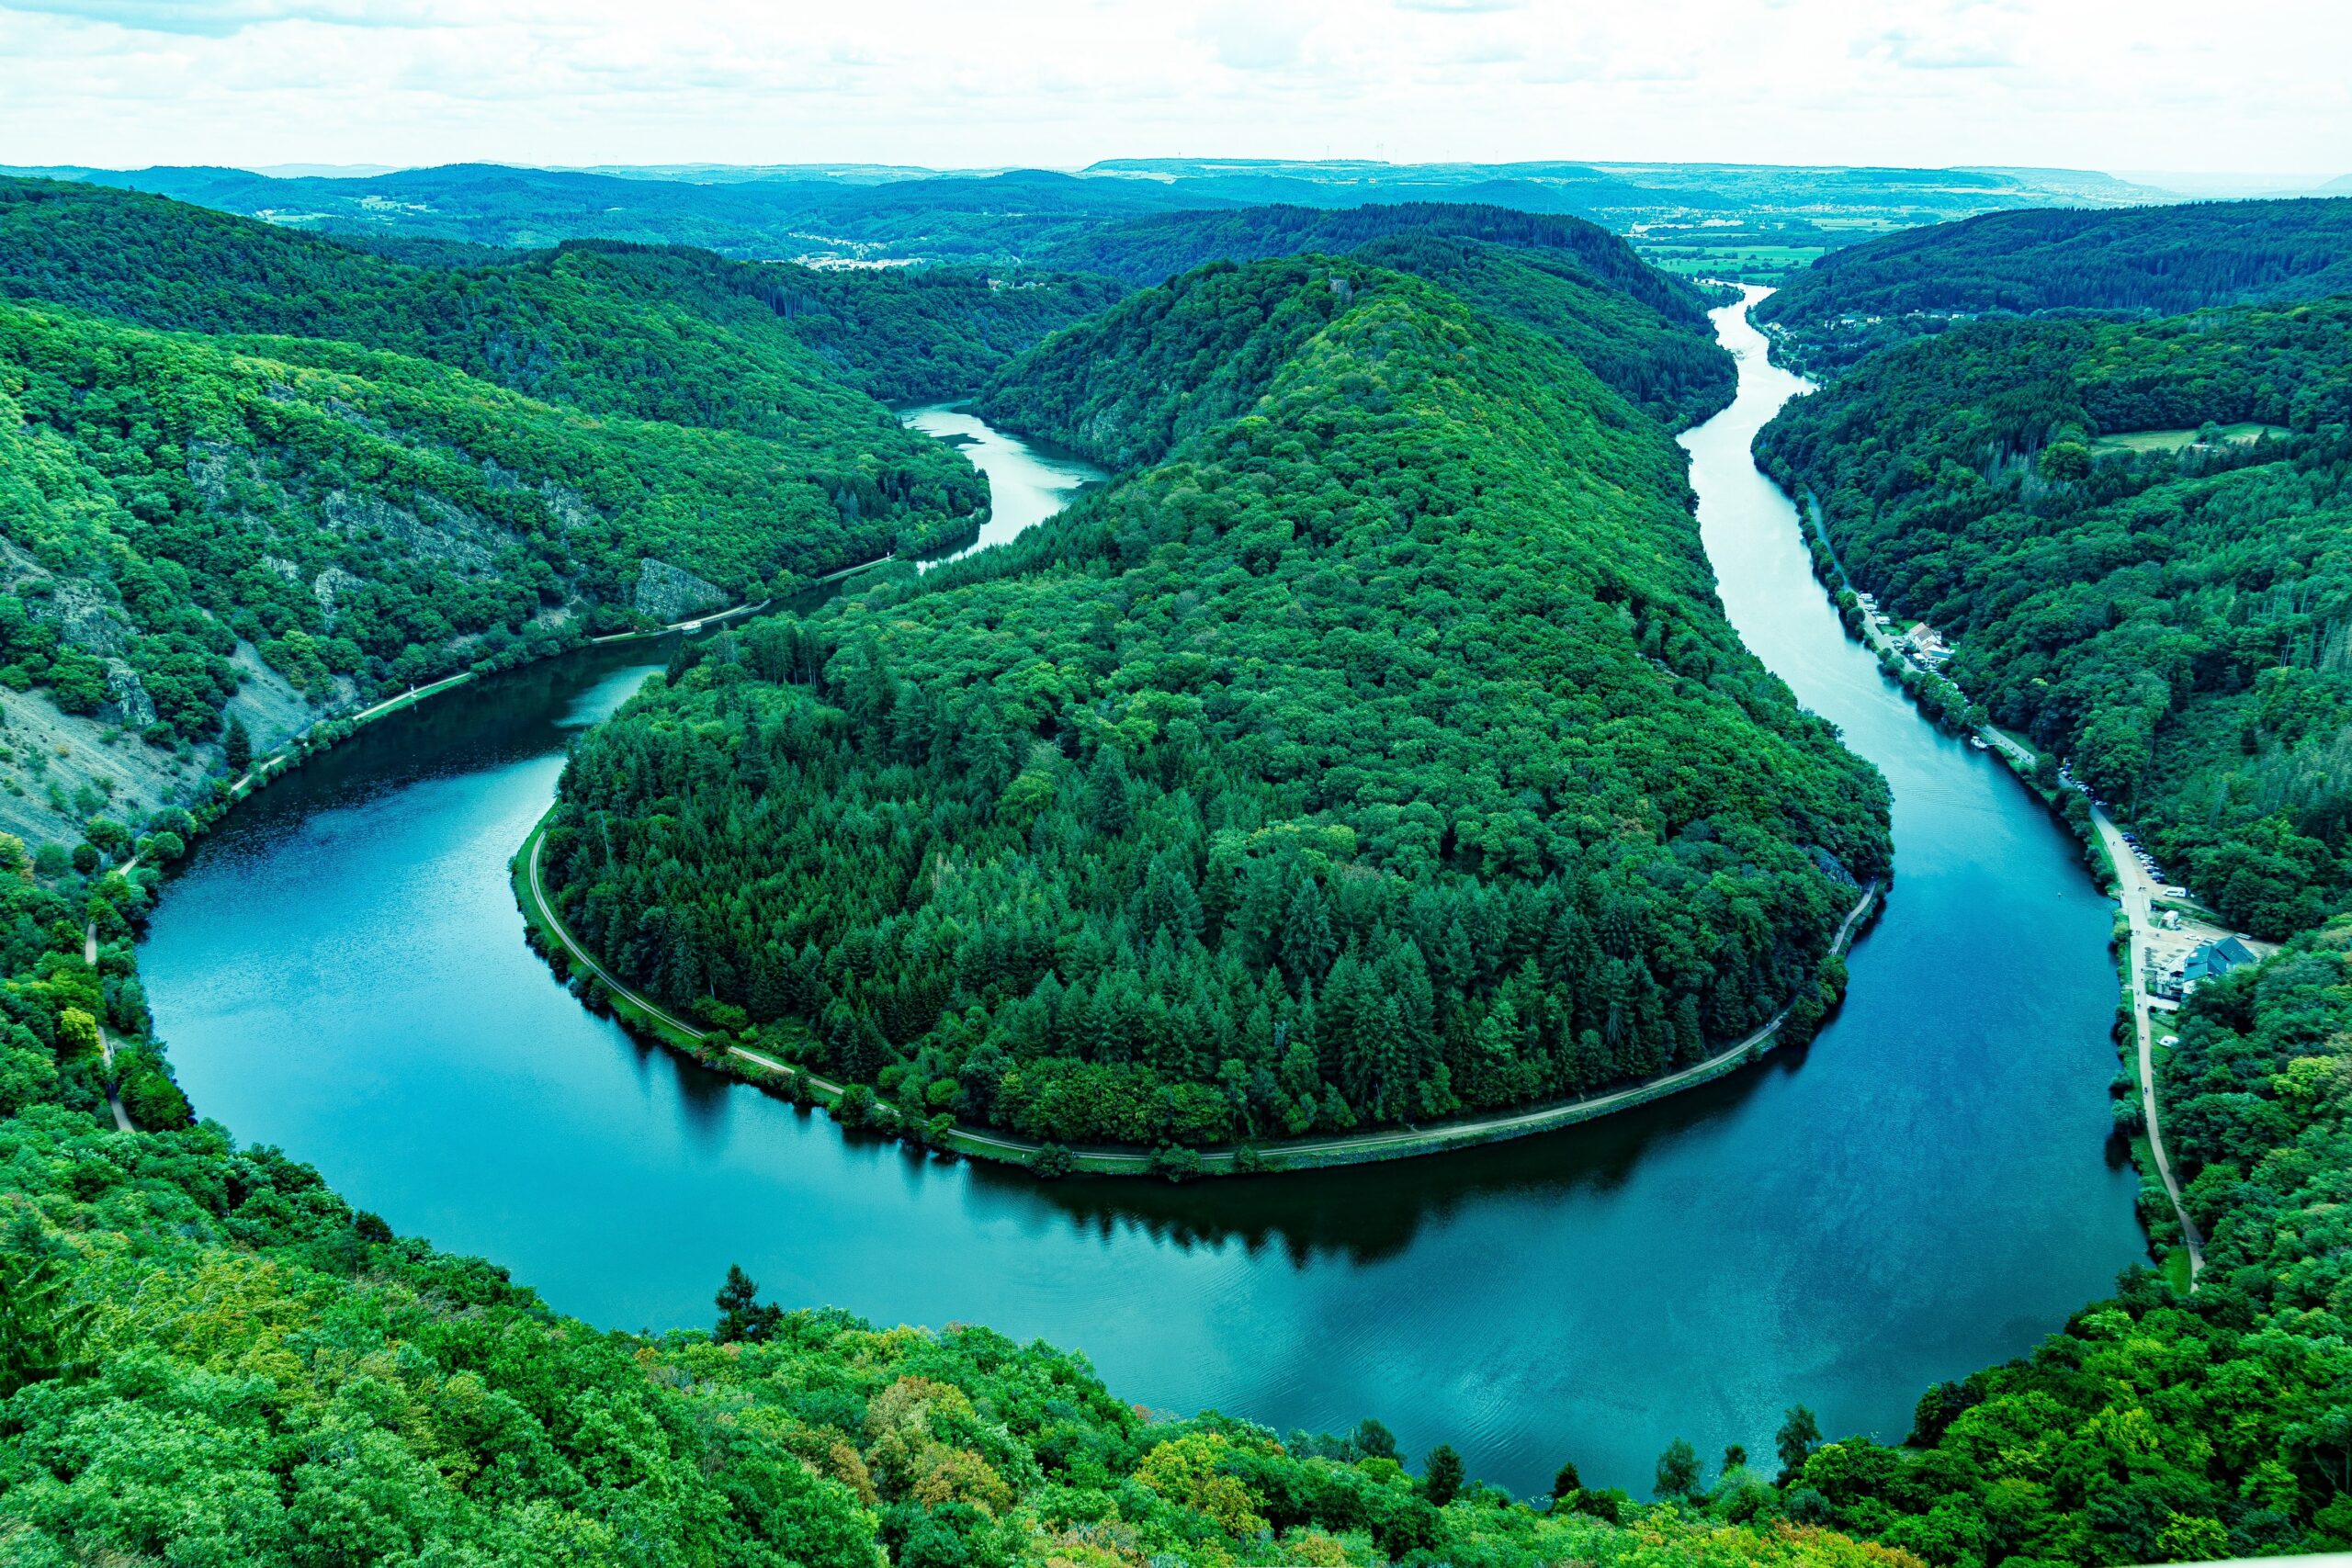 Panoramic Views at the great bend of the Saar.